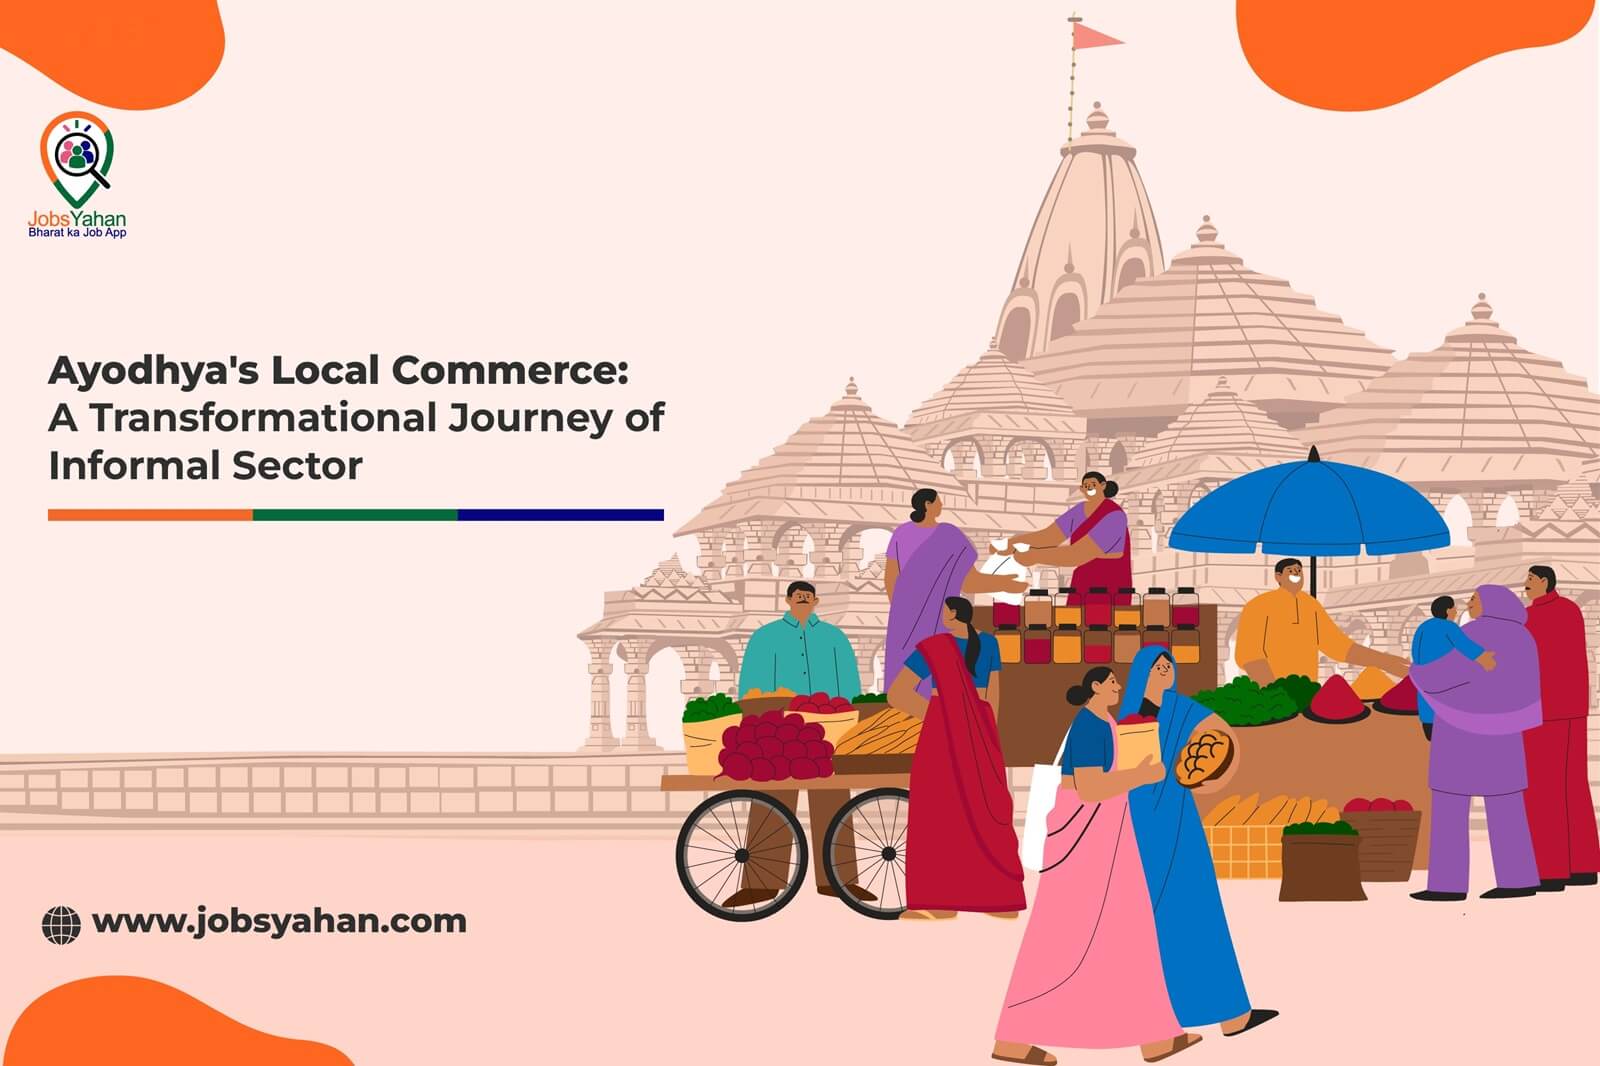 Ayodhya's Local Commerce: A Transformational Journey of Informal Sector